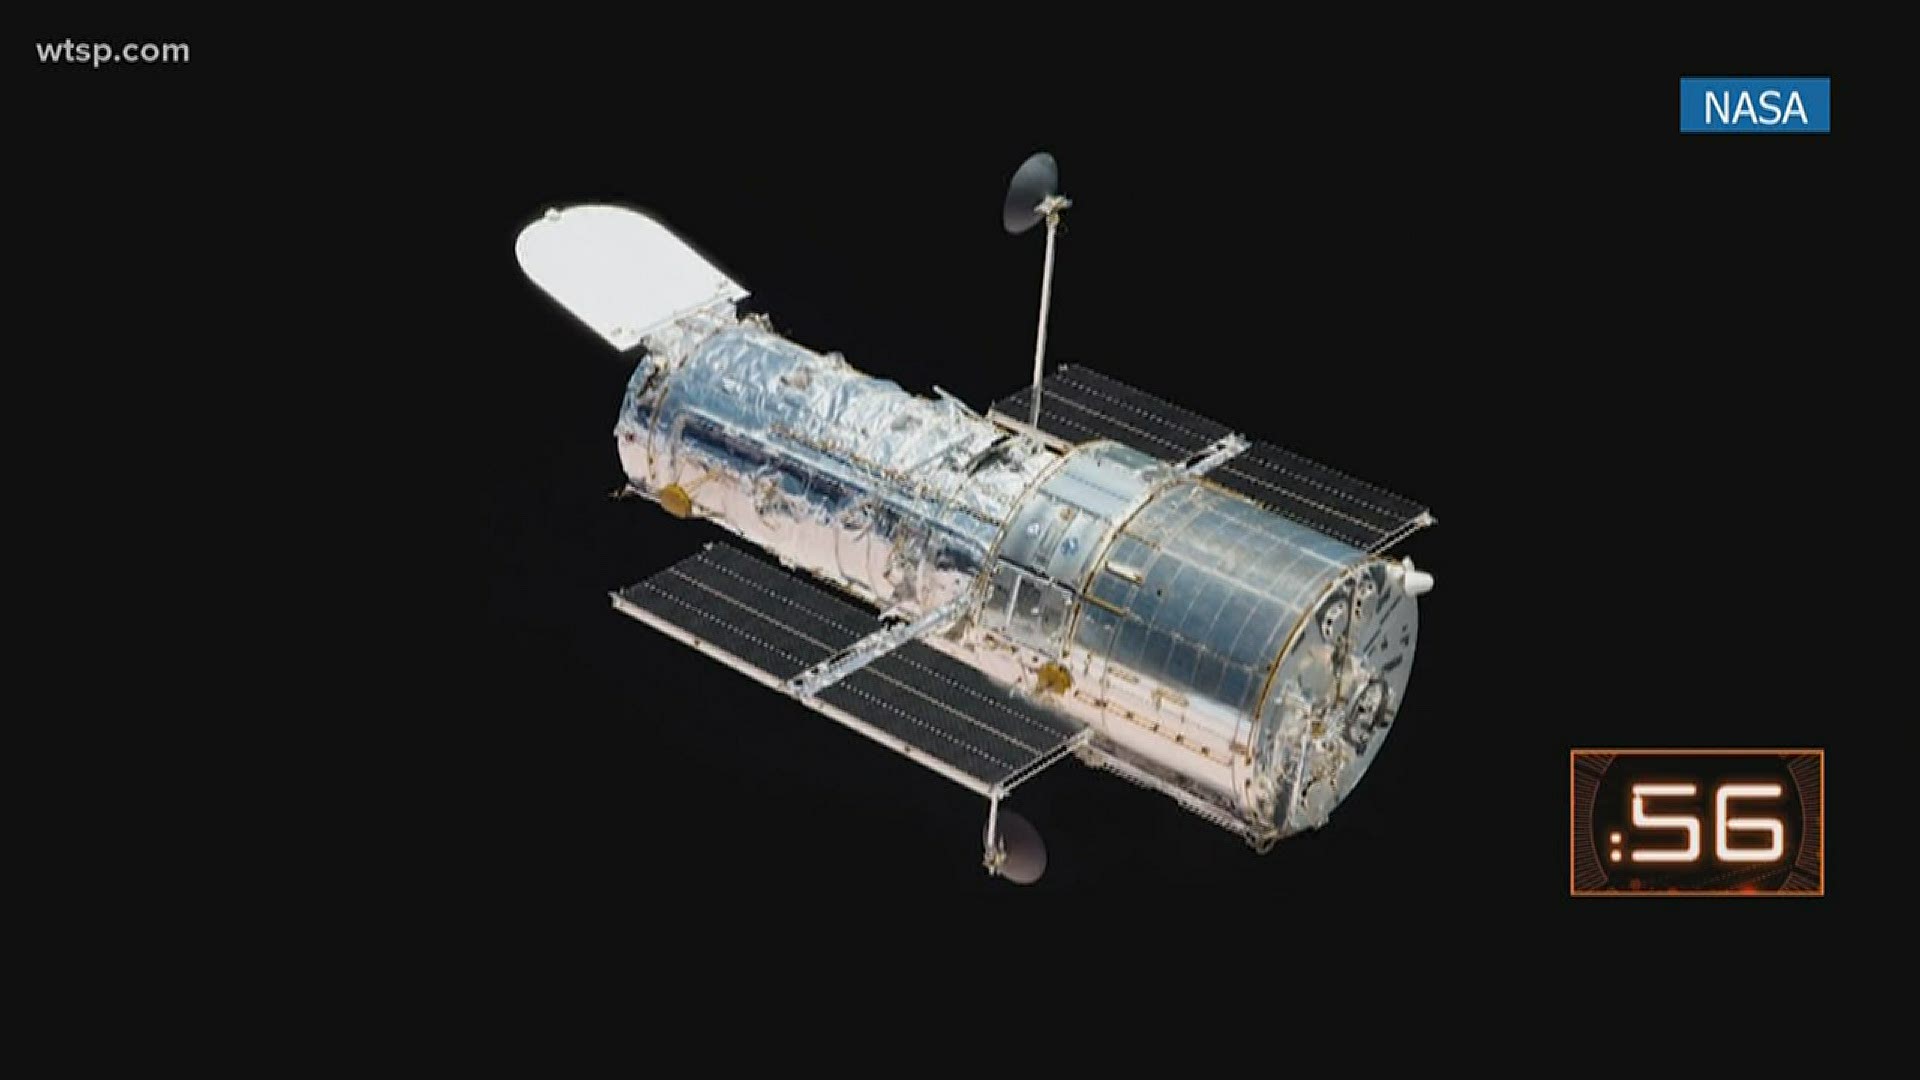 The Hubble Telescope was launched in 1990 and expected to last 15 years. It celebrated 30 years in space in 2020.